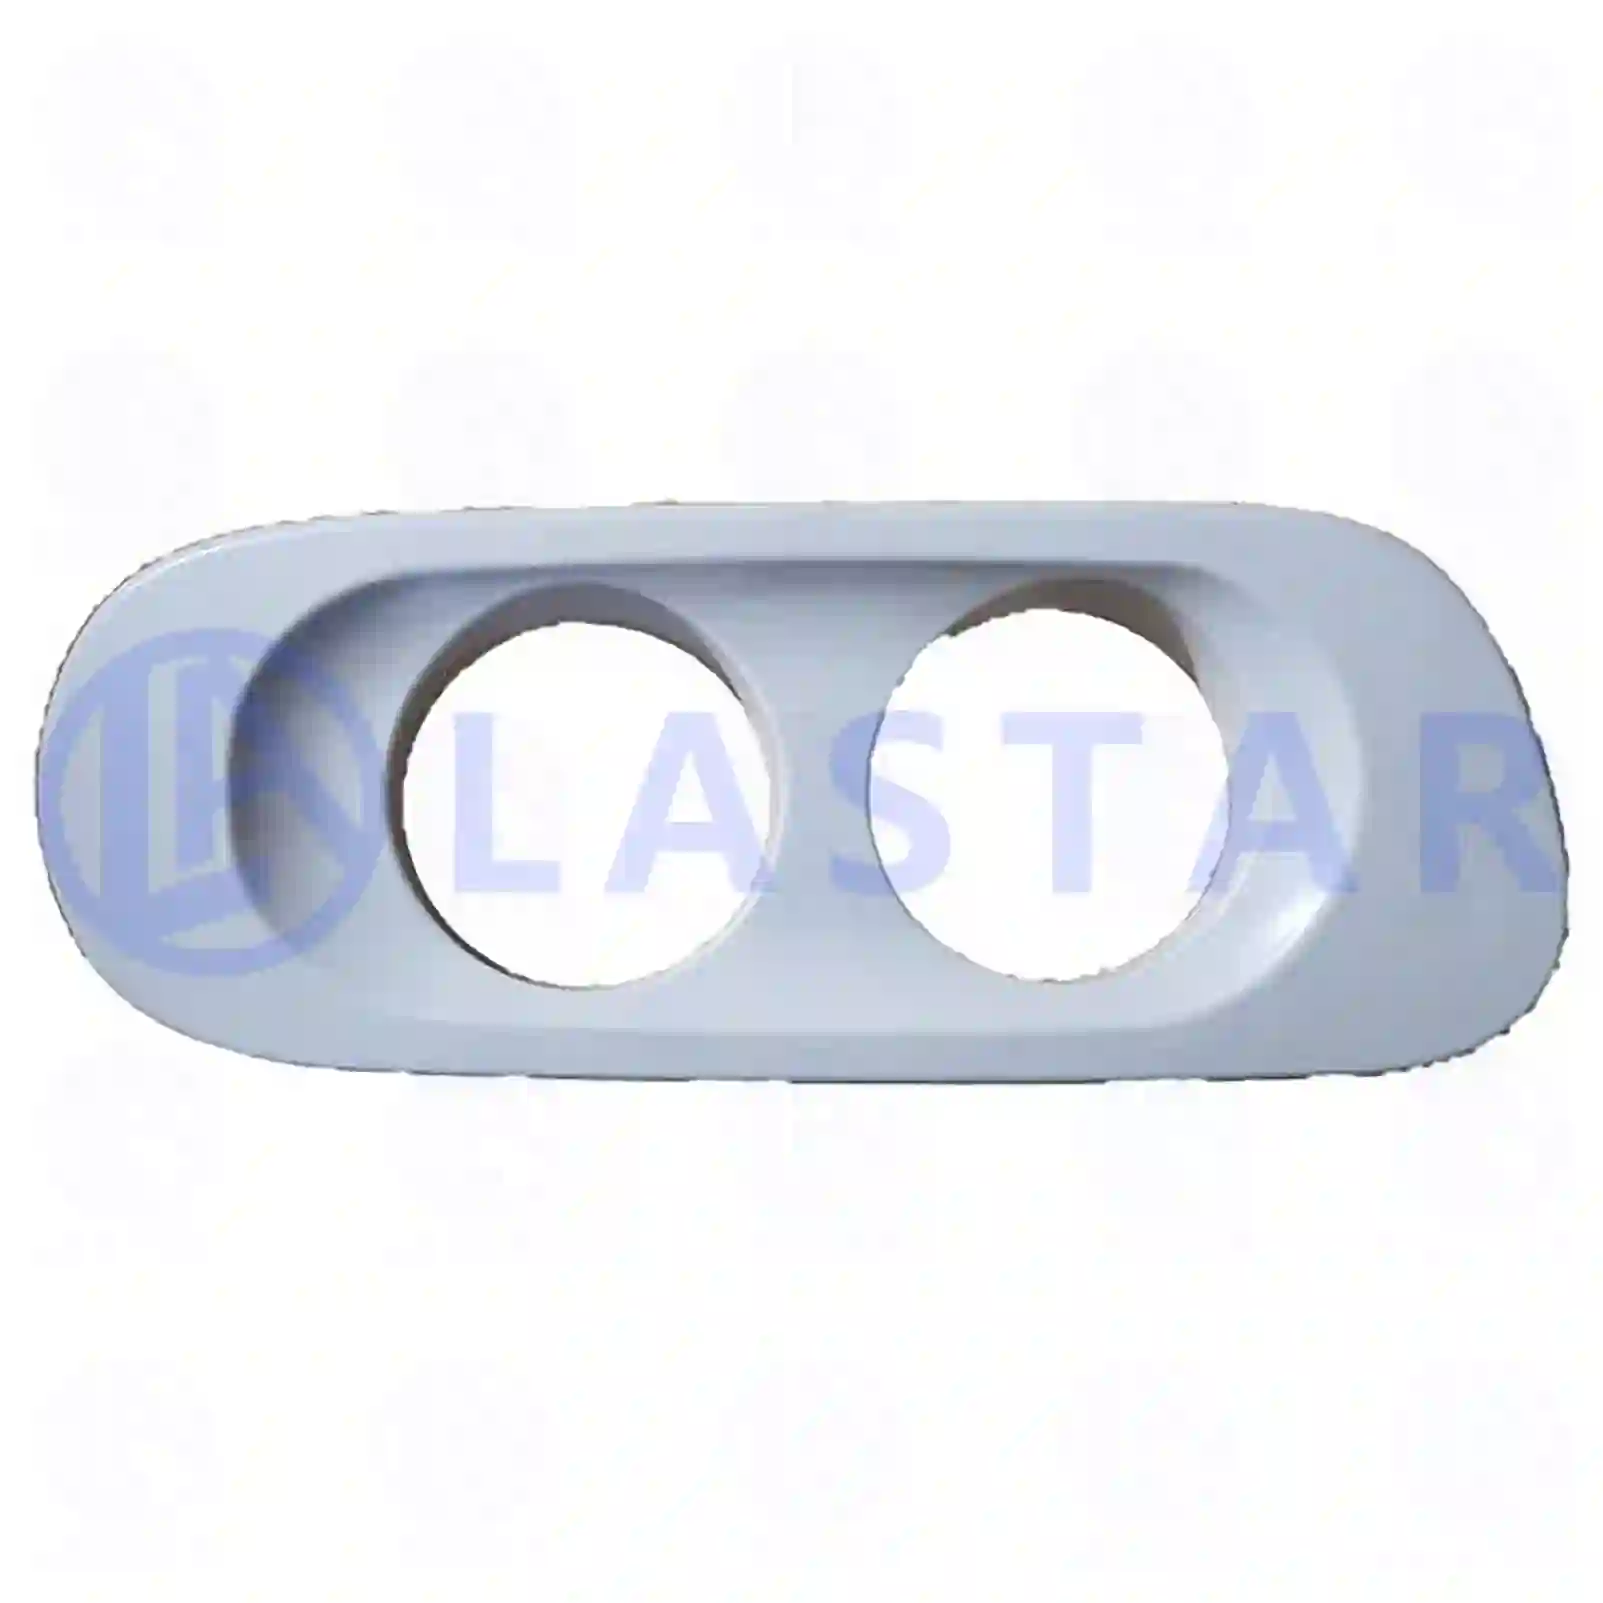 Bumper cover, auxiliary lamp, right, 77719806, 1650261, 1683724, ZG60194-0008 ||  77719806 Lastar Spare Part | Truck Spare Parts, Auotomotive Spare Parts Bumper cover, auxiliary lamp, right, 77719806, 1650261, 1683724, ZG60194-0008 ||  77719806 Lastar Spare Part | Truck Spare Parts, Auotomotive Spare Parts